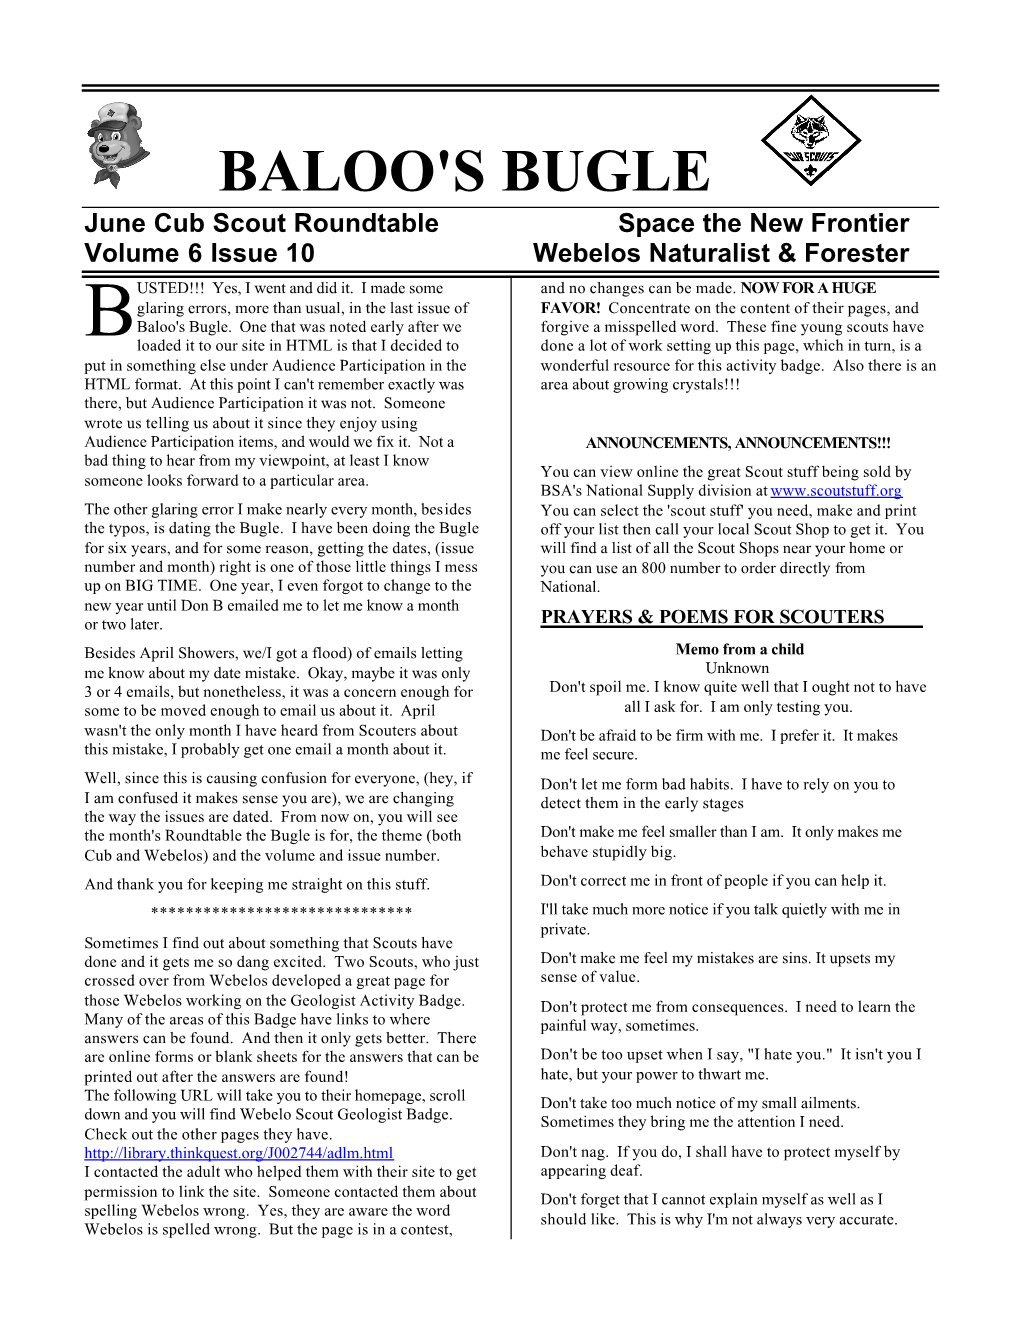 BALOO's BUGLE June Cub Scout Roundtable Space the New Frontier Volume 6 Issue 10 Webelos Naturalist & Forester USTED!!! Yes, I Went and Did It